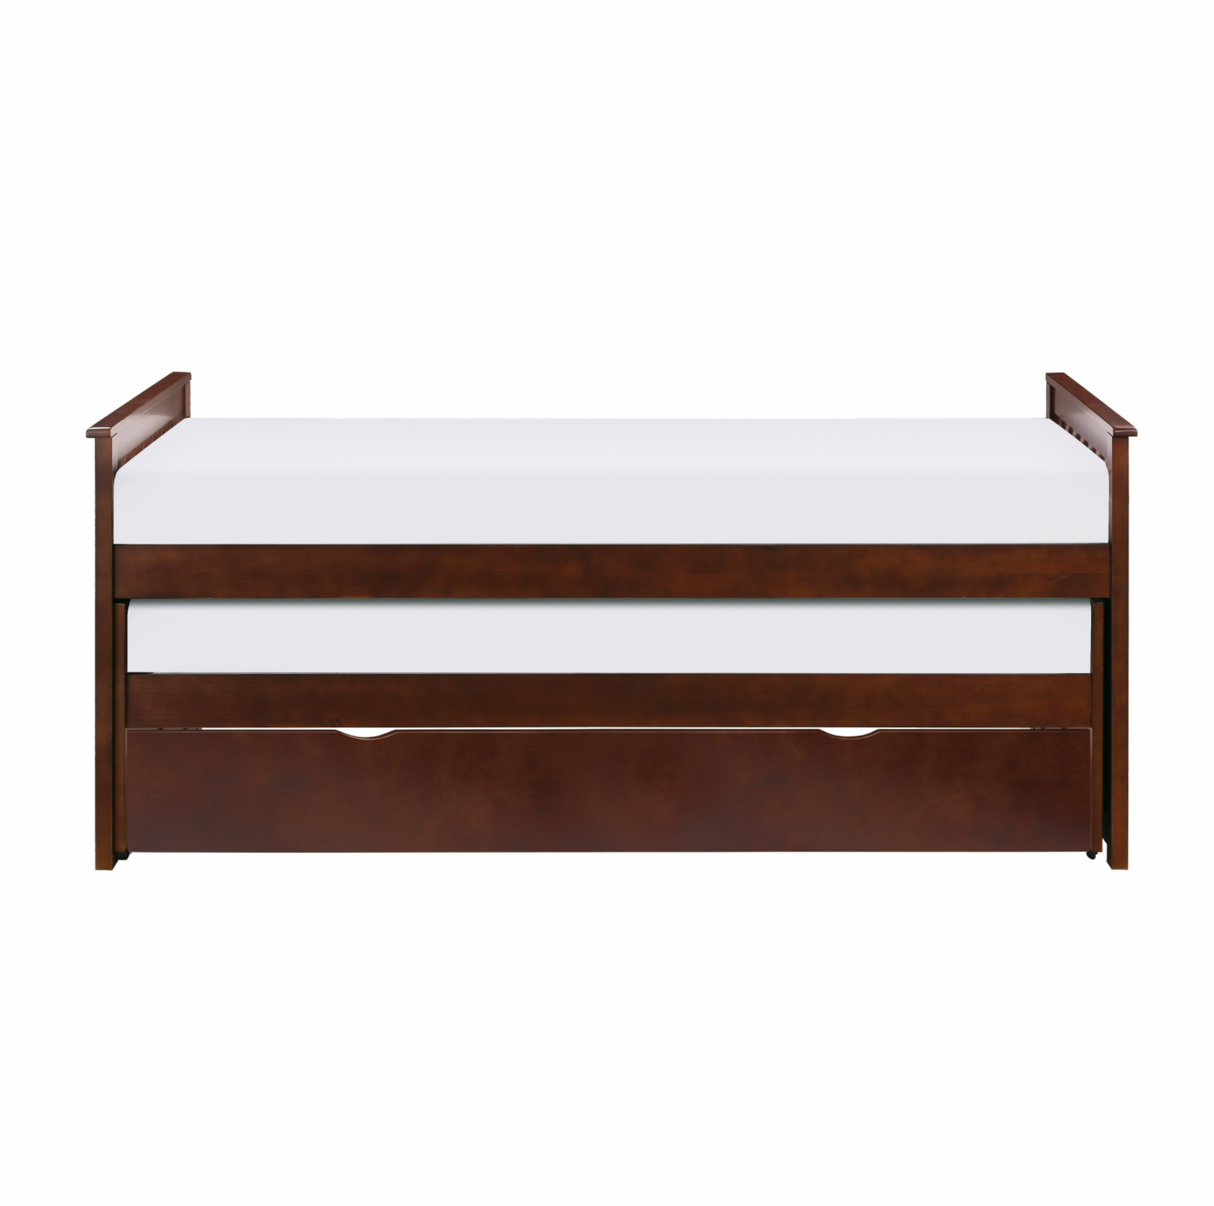 Rowe Dark Cherry Twin/Twin Bed with Twin Trundle